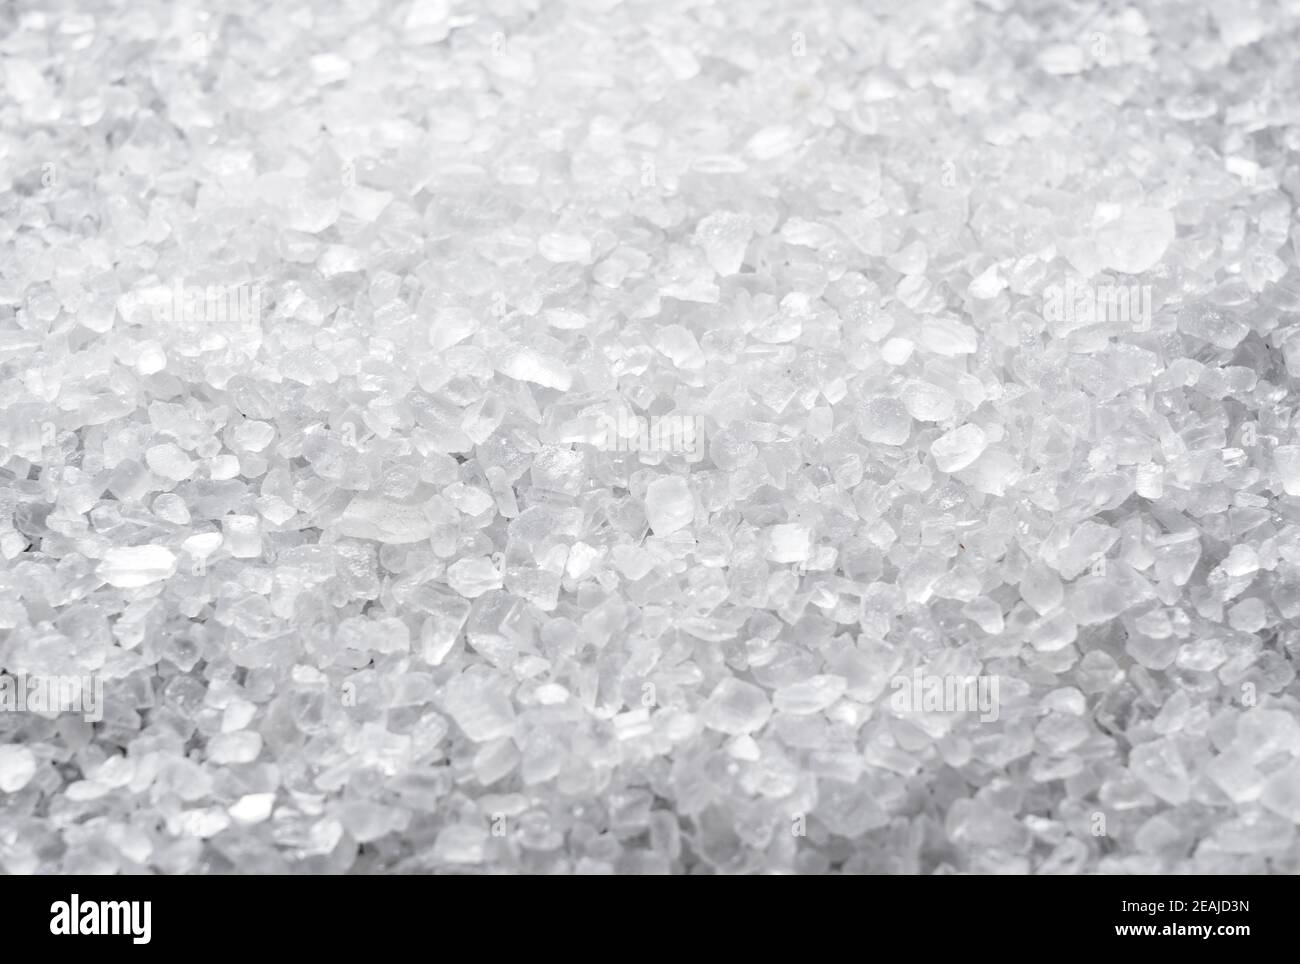 Himalayan rock salt spread over the entire screen Stock Photo